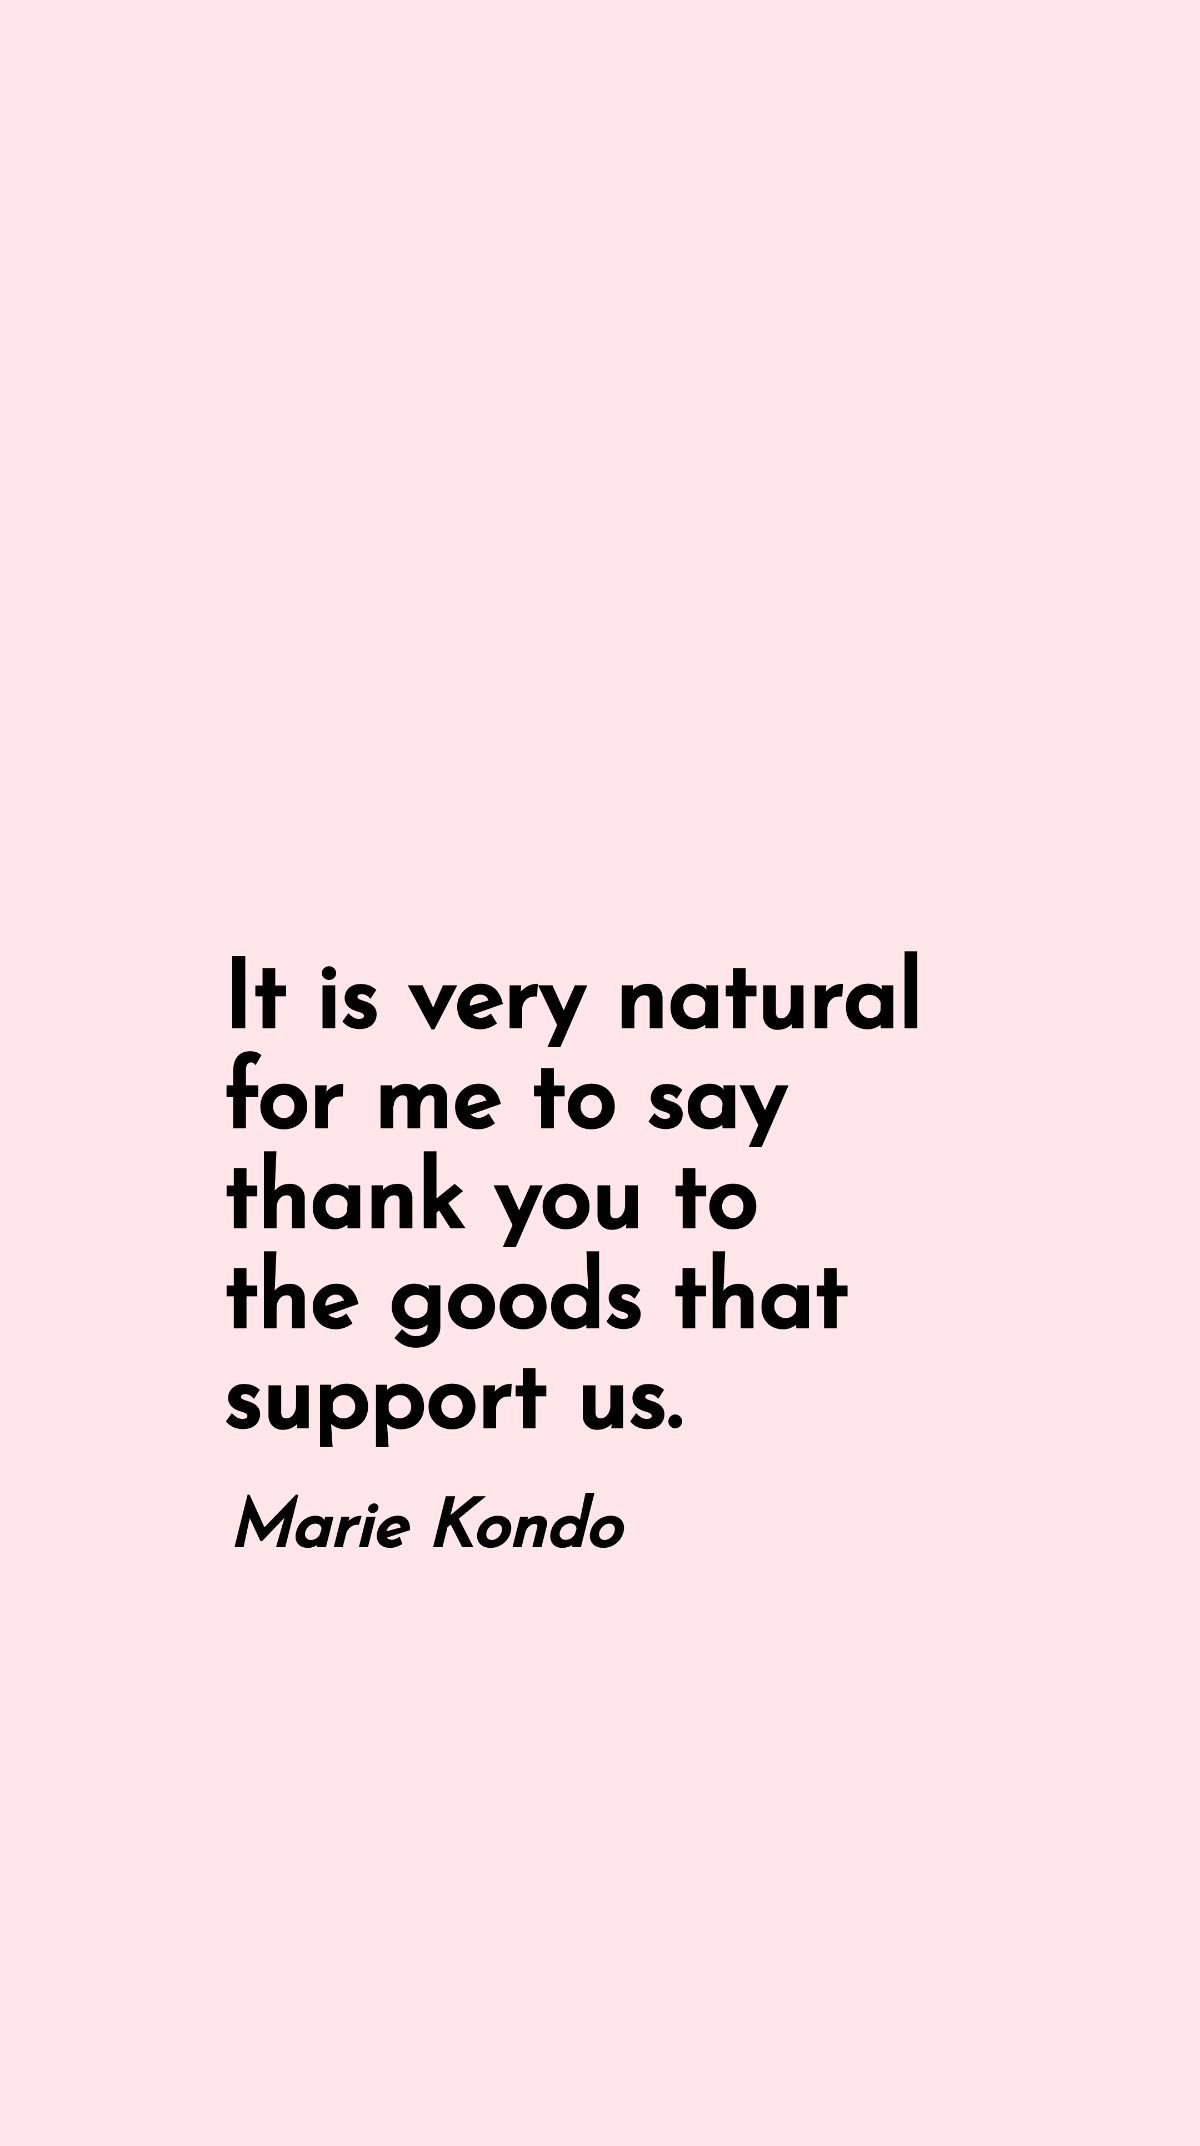 Free Marie Kondo - It is very natural for me to say thank you to the goods that support us. Template